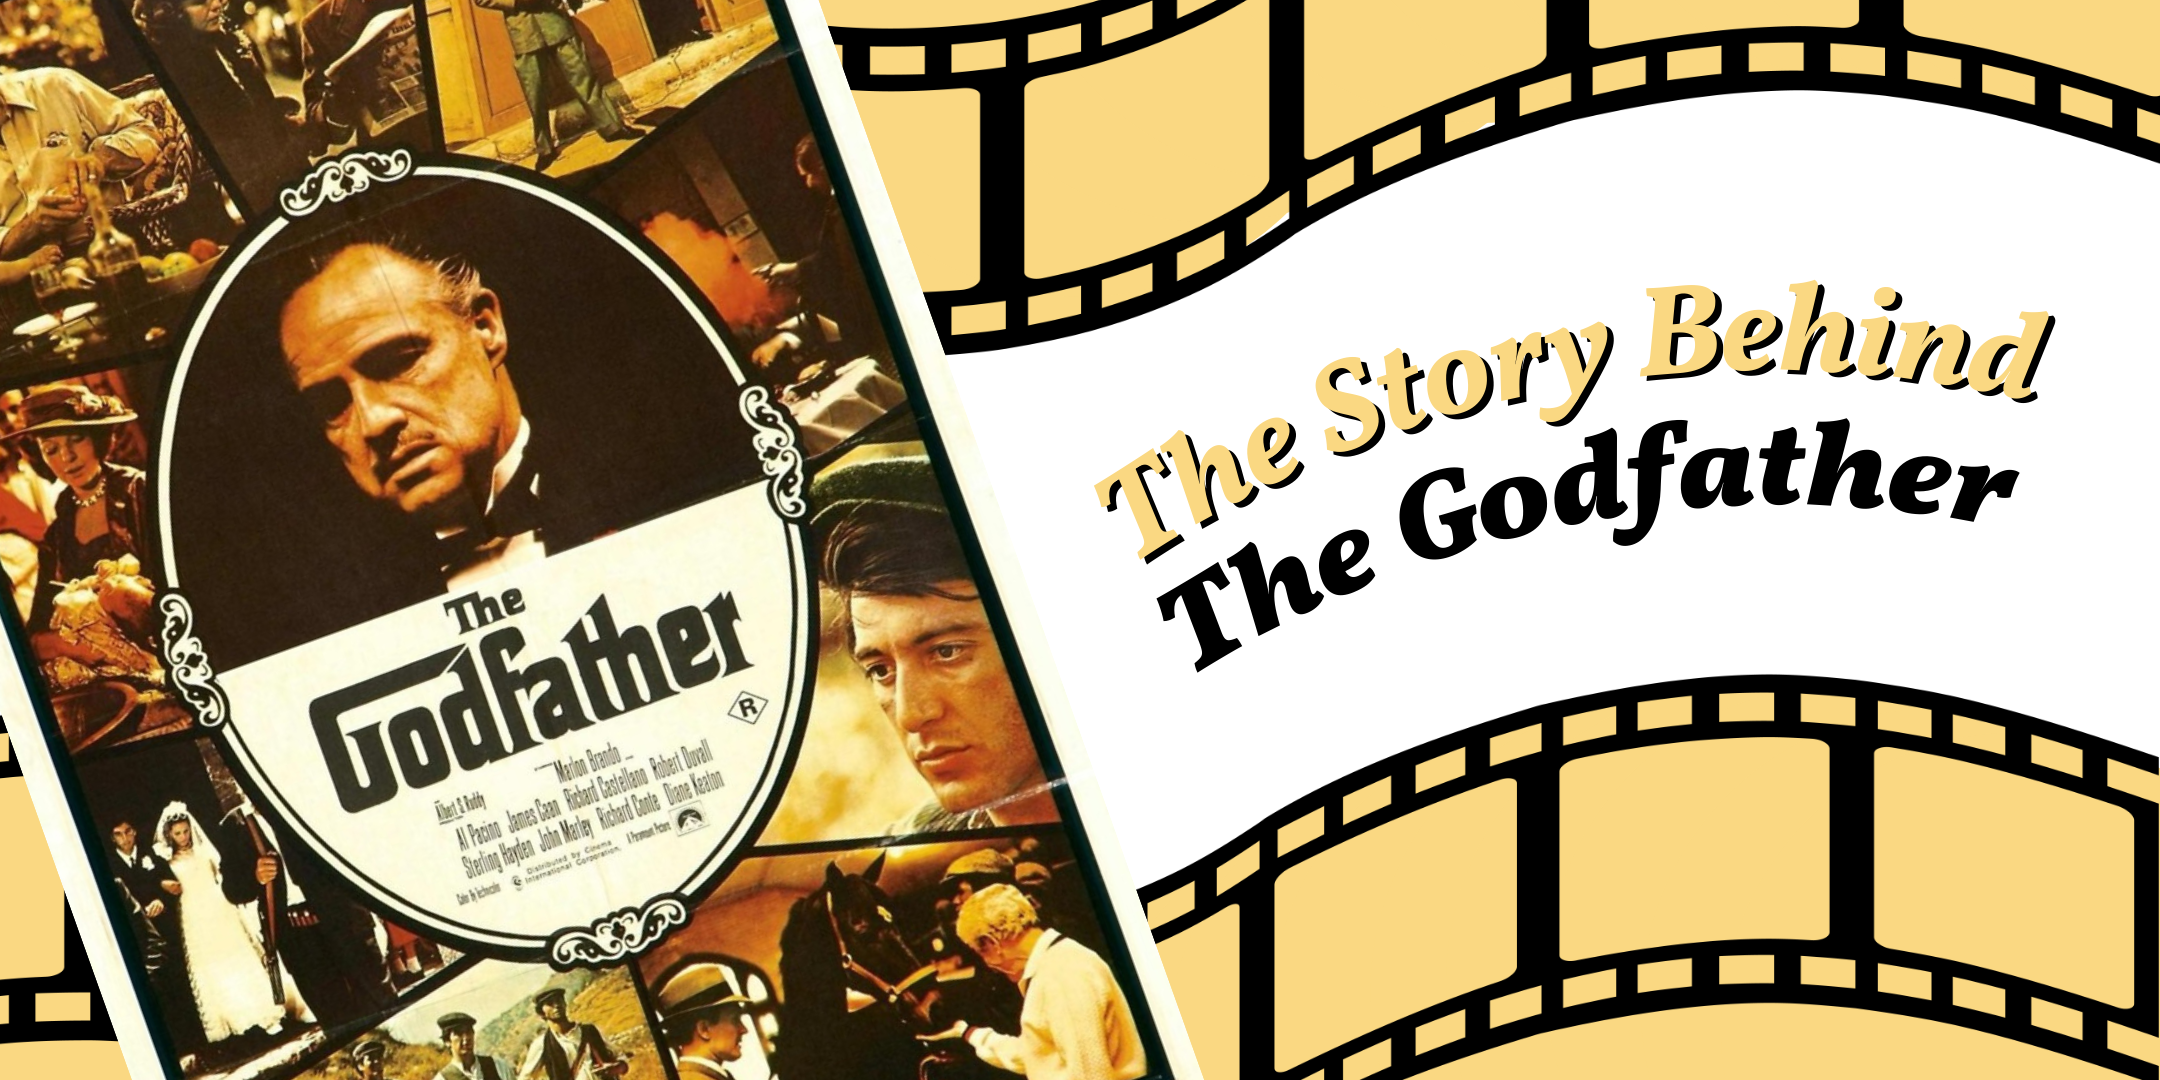 The Story Behind The Godfather event image with movie poster